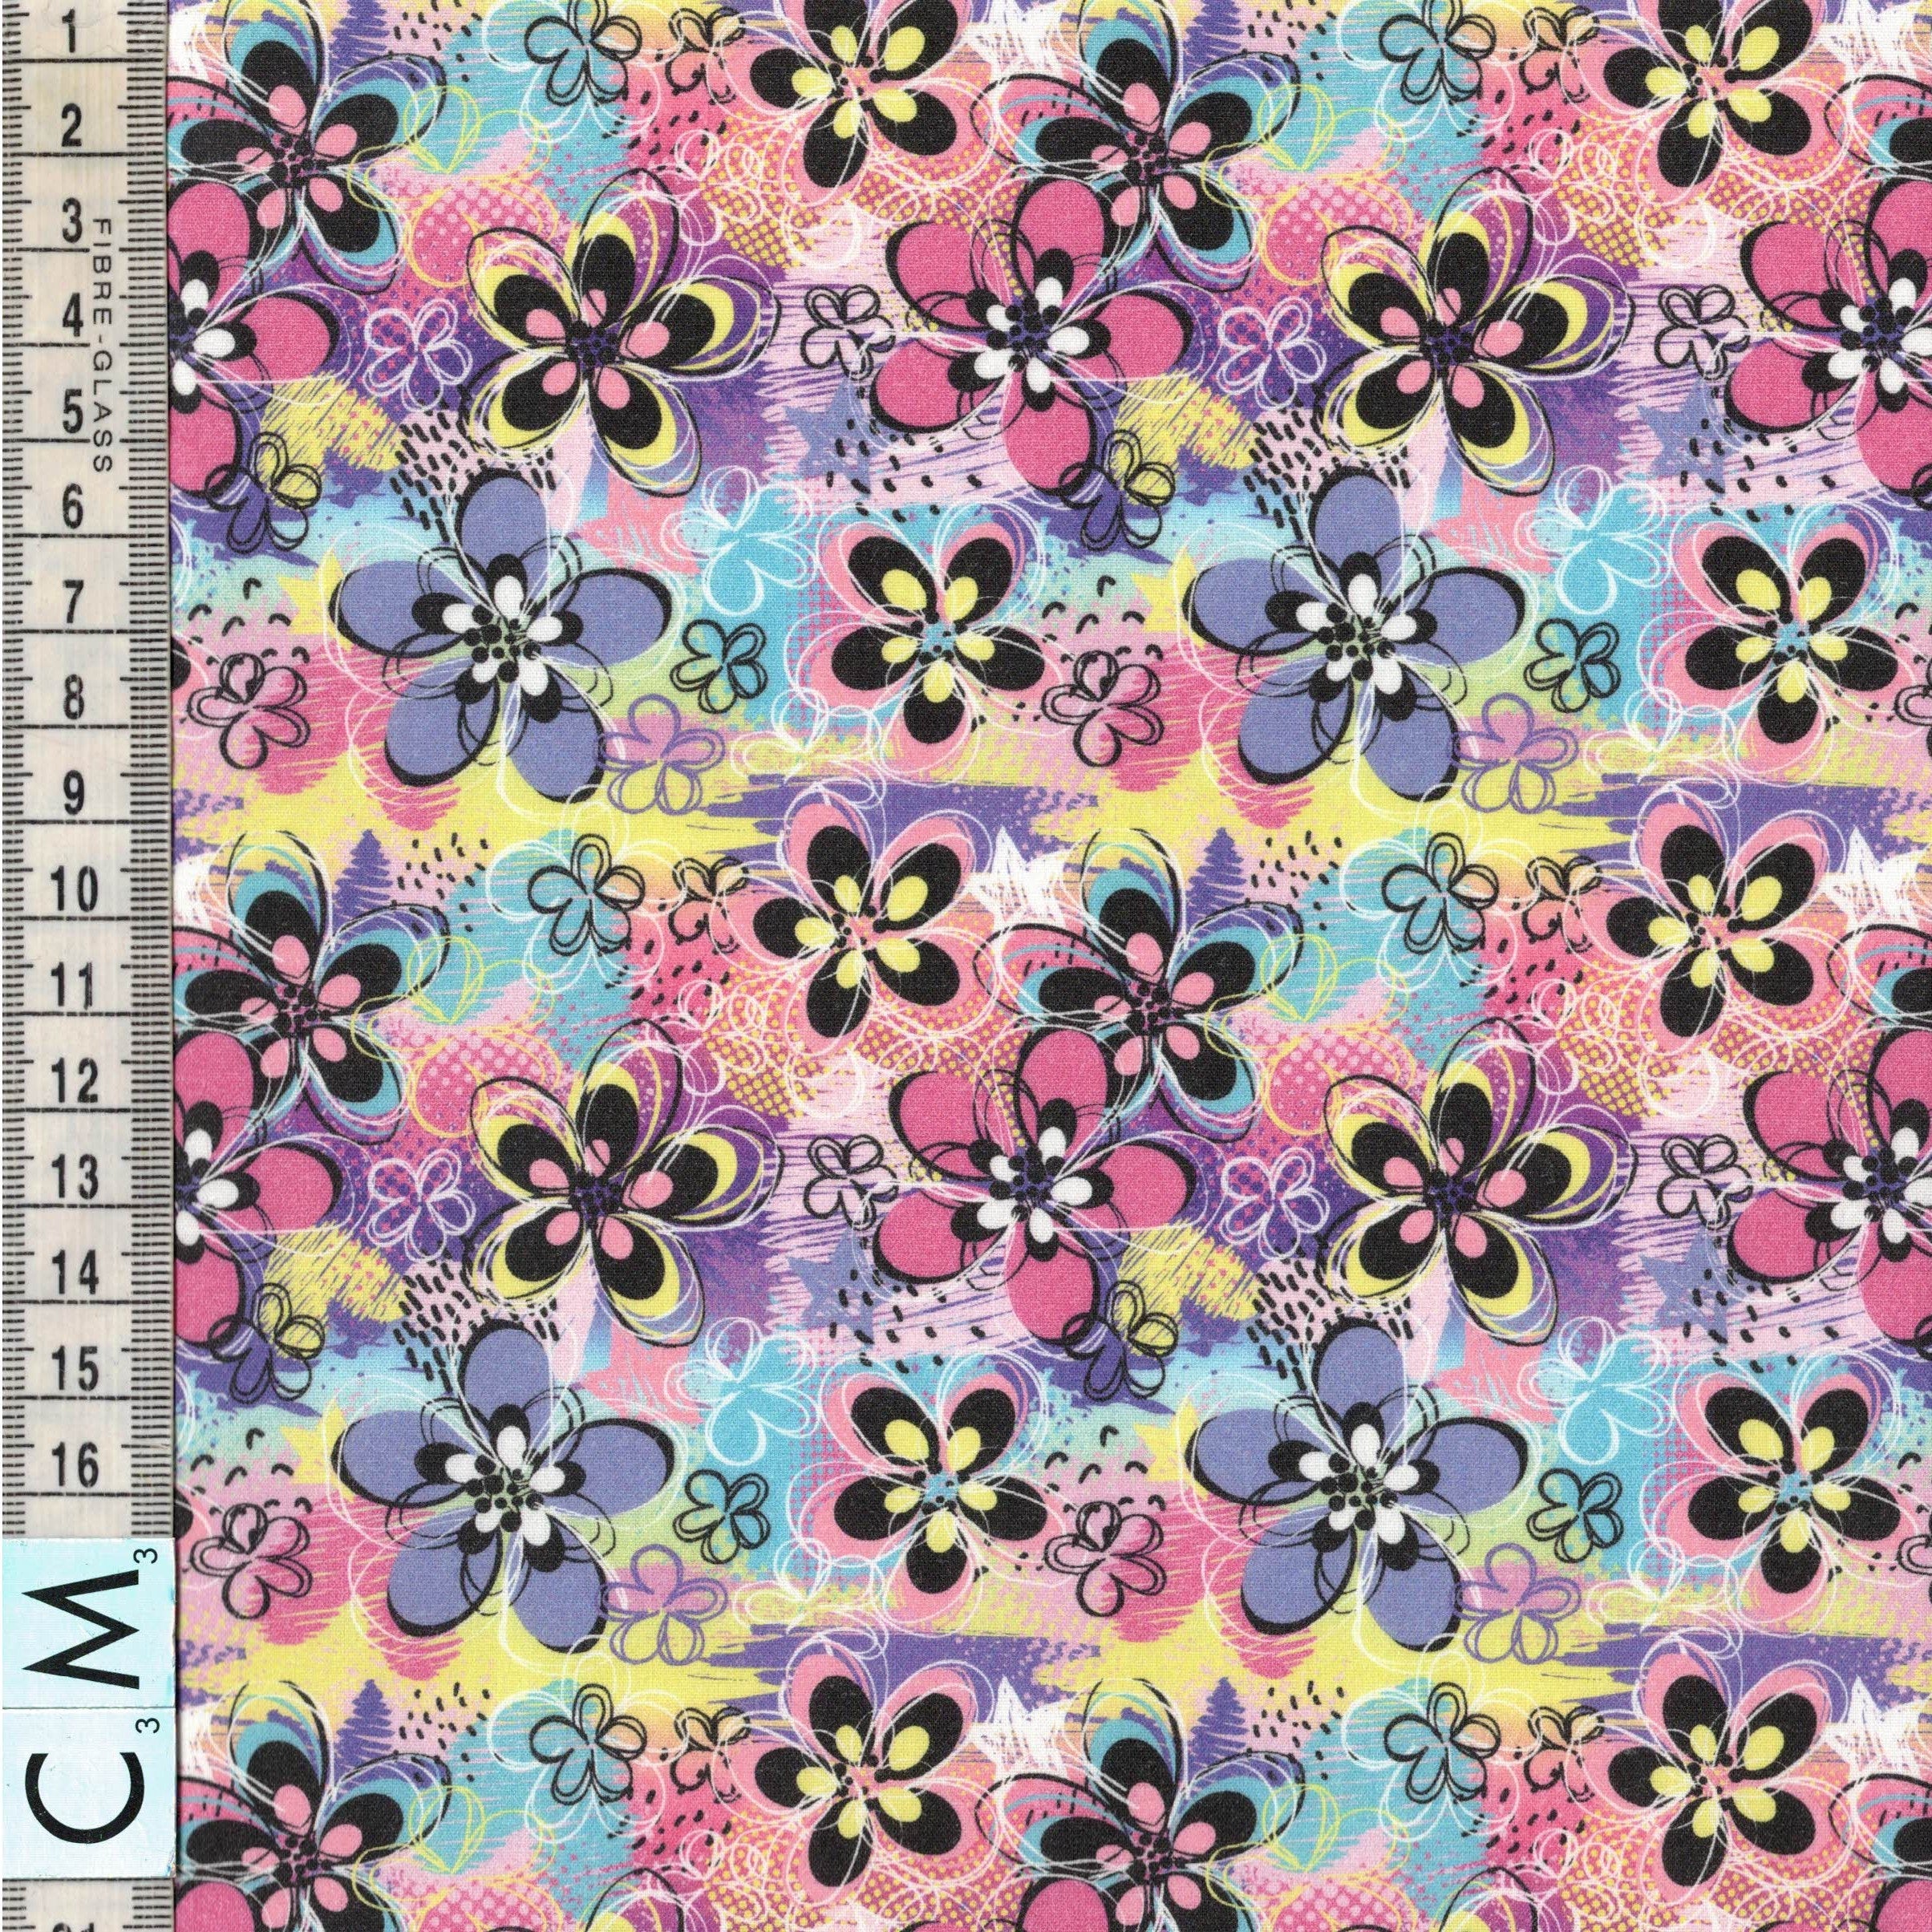 PRE-ORDER Quirky Cotton Abstract Geometric Pattern Floral Multi-Coloured (PRE-ORDER QC Urban Flowers)